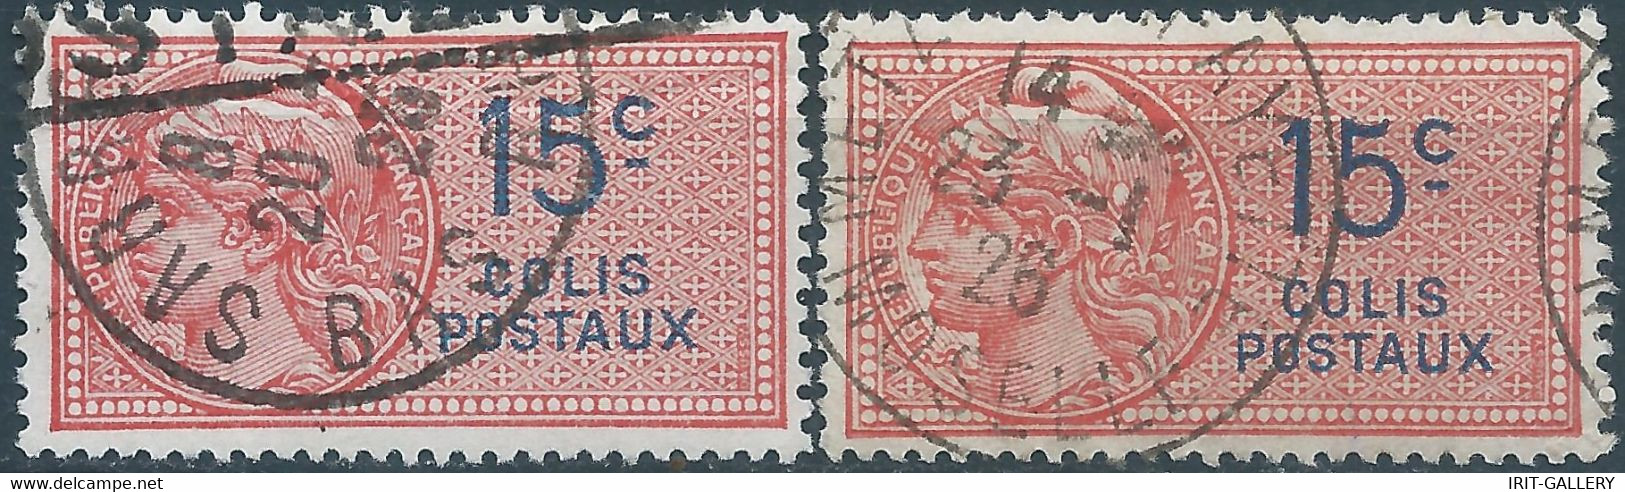 FRANCE,1925 Revenue Stamp Fiscal Tax, COLIS POSTAL 15c,obliterated - Zegels